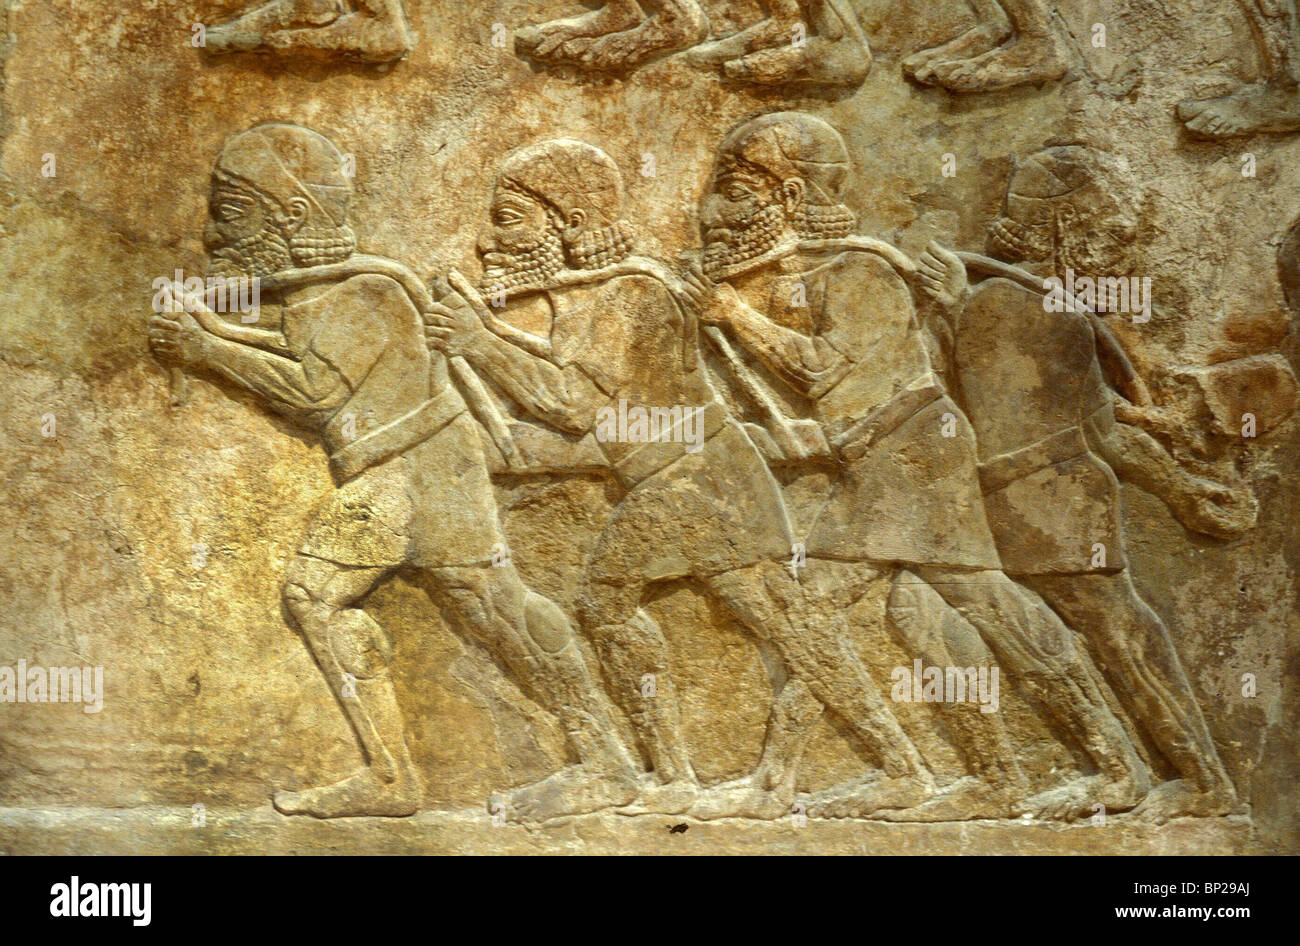 2844. SLAVES OR PRISONERS ON CONSTRUCTION WORK, RELIEF FROM KING SARAGON'S PALACE IN KORSABAD, C. 8TH. C. B.C. Stock Photo